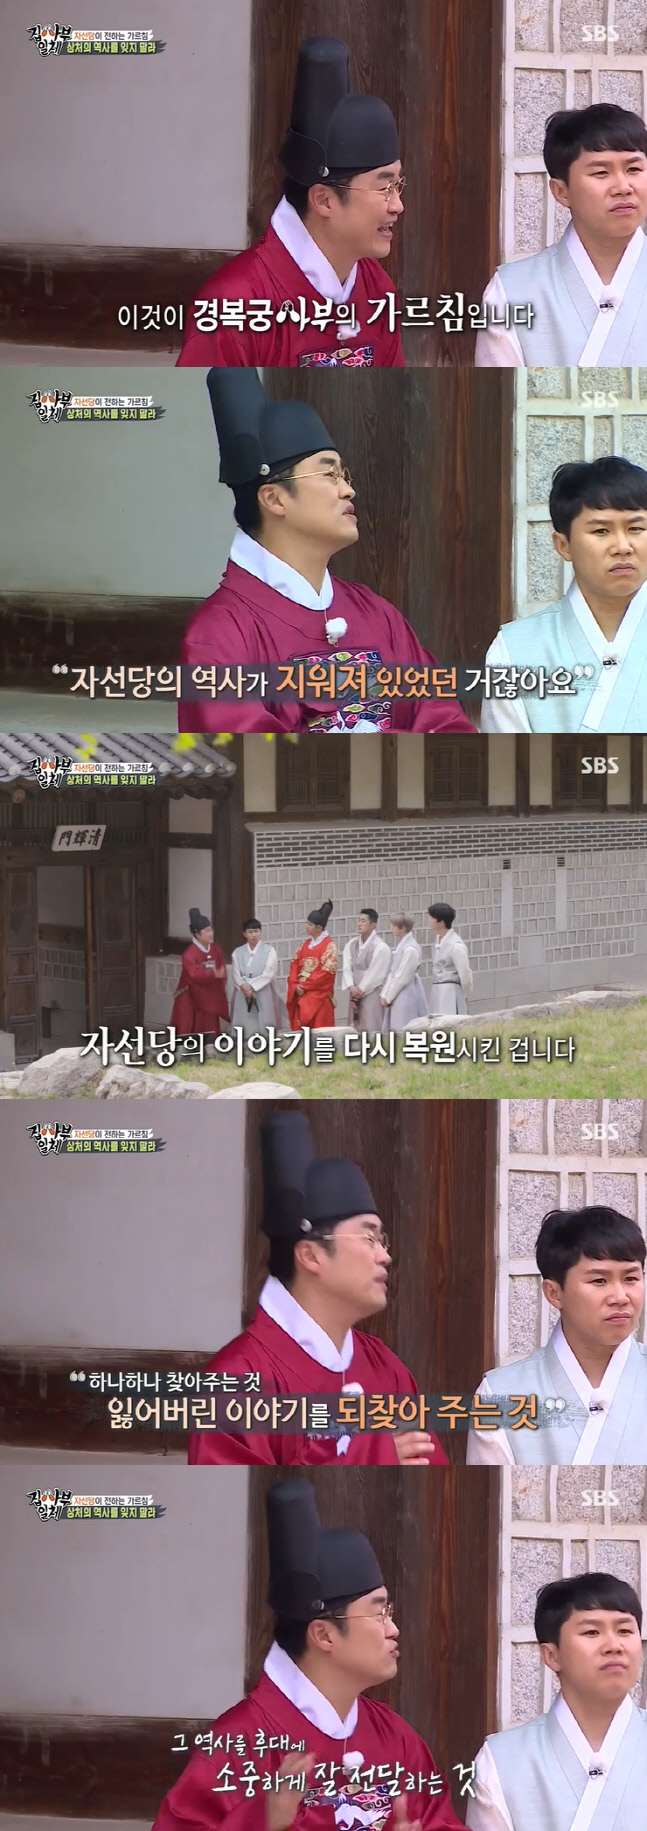 This is a commentary by Choi Tae-seong Histories instructor who taught Gyoungbokgung Master.On SBS All The Butlers broadcast on the last 2 days, I had time to learn for the first time in history to find the non-personal gyeongbokgung master.Members of All The Butlers looked around our history by looking around Choi Tae-seong instructor, Goodbye My Princess (Kim Kang-hoon) and Gyeongbokgung.I experienced indirect experiences from the gaze of the Joseon royal family to life.Lee Seung-gi explained that Gyeongbokgung is like a place where people live in the end, and that it is a place where people work, learn, eat, enjoy and live.Looking back at Gyoungbokgung, the members of All The Butlers realized late that Goodbye My Princess, who was near, was a court, not a person.Goodbye My Princess was a charitable party, a space of Seja and Sejabin.The charity party, which did not show a bright appearance throughout the palace, had Chest sick Histories.It was sold at auction during the Japanese colonial period and wandered around Japan under the name of Chosun Pavilion.It was only returned in 1996, 80 years later, but the Charity Party could not return to its original seat, which was restored in 1999.The charity party, which was abandoned in the backyard of the Japanese house of Okura, was left with a fire in the Kanto earthquake, and it was located in the backyard of the Guncheong Palace because it could not build it due to fire.In particular, the Chest sickness was the place where the Charity Party was located after the Empress Myeongseong was burned.It is a place with both Chest painful histories, but the backyard of the Guncheong Palace was a place that was turned away by visitors.It was a space that I had to pass by without knowing this Histories.  (Returning the Charity Party) to regain the lost Histories.It is the teaching of the Gyeongbokgung Master that the Histories are precious to the future. Photos  SBS